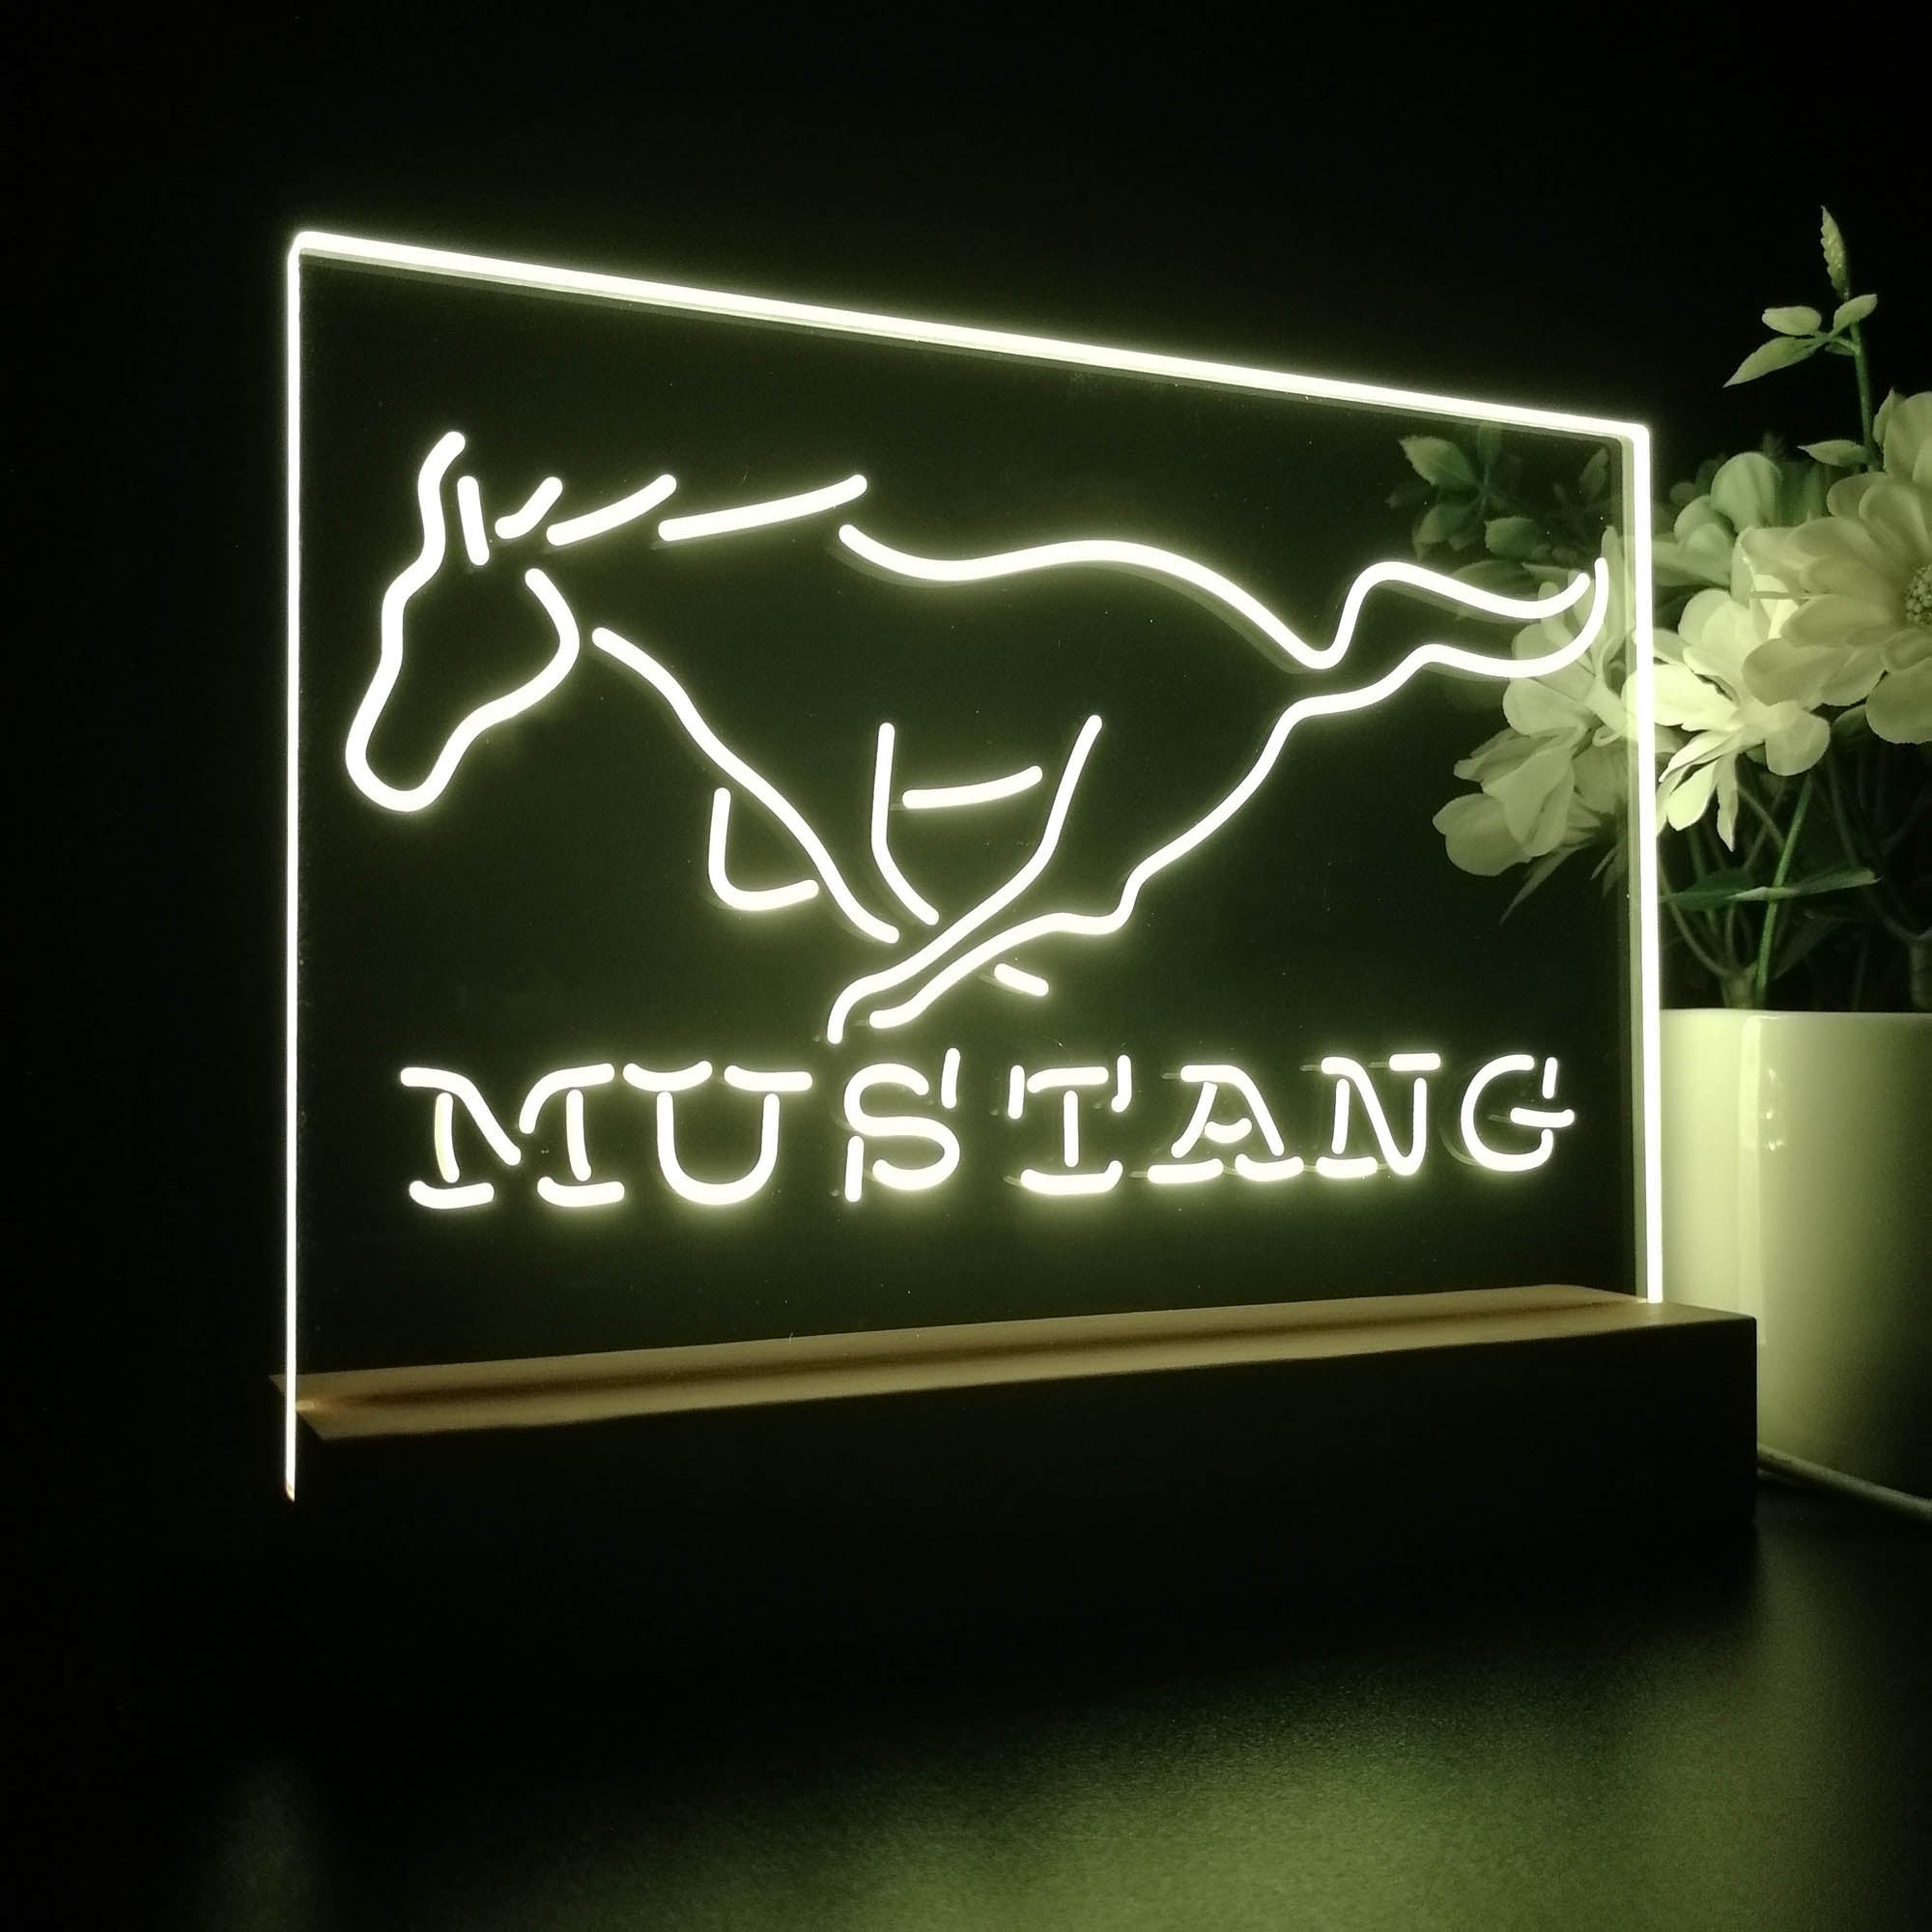 Mustang Ford 3D LED Illusion Night Light